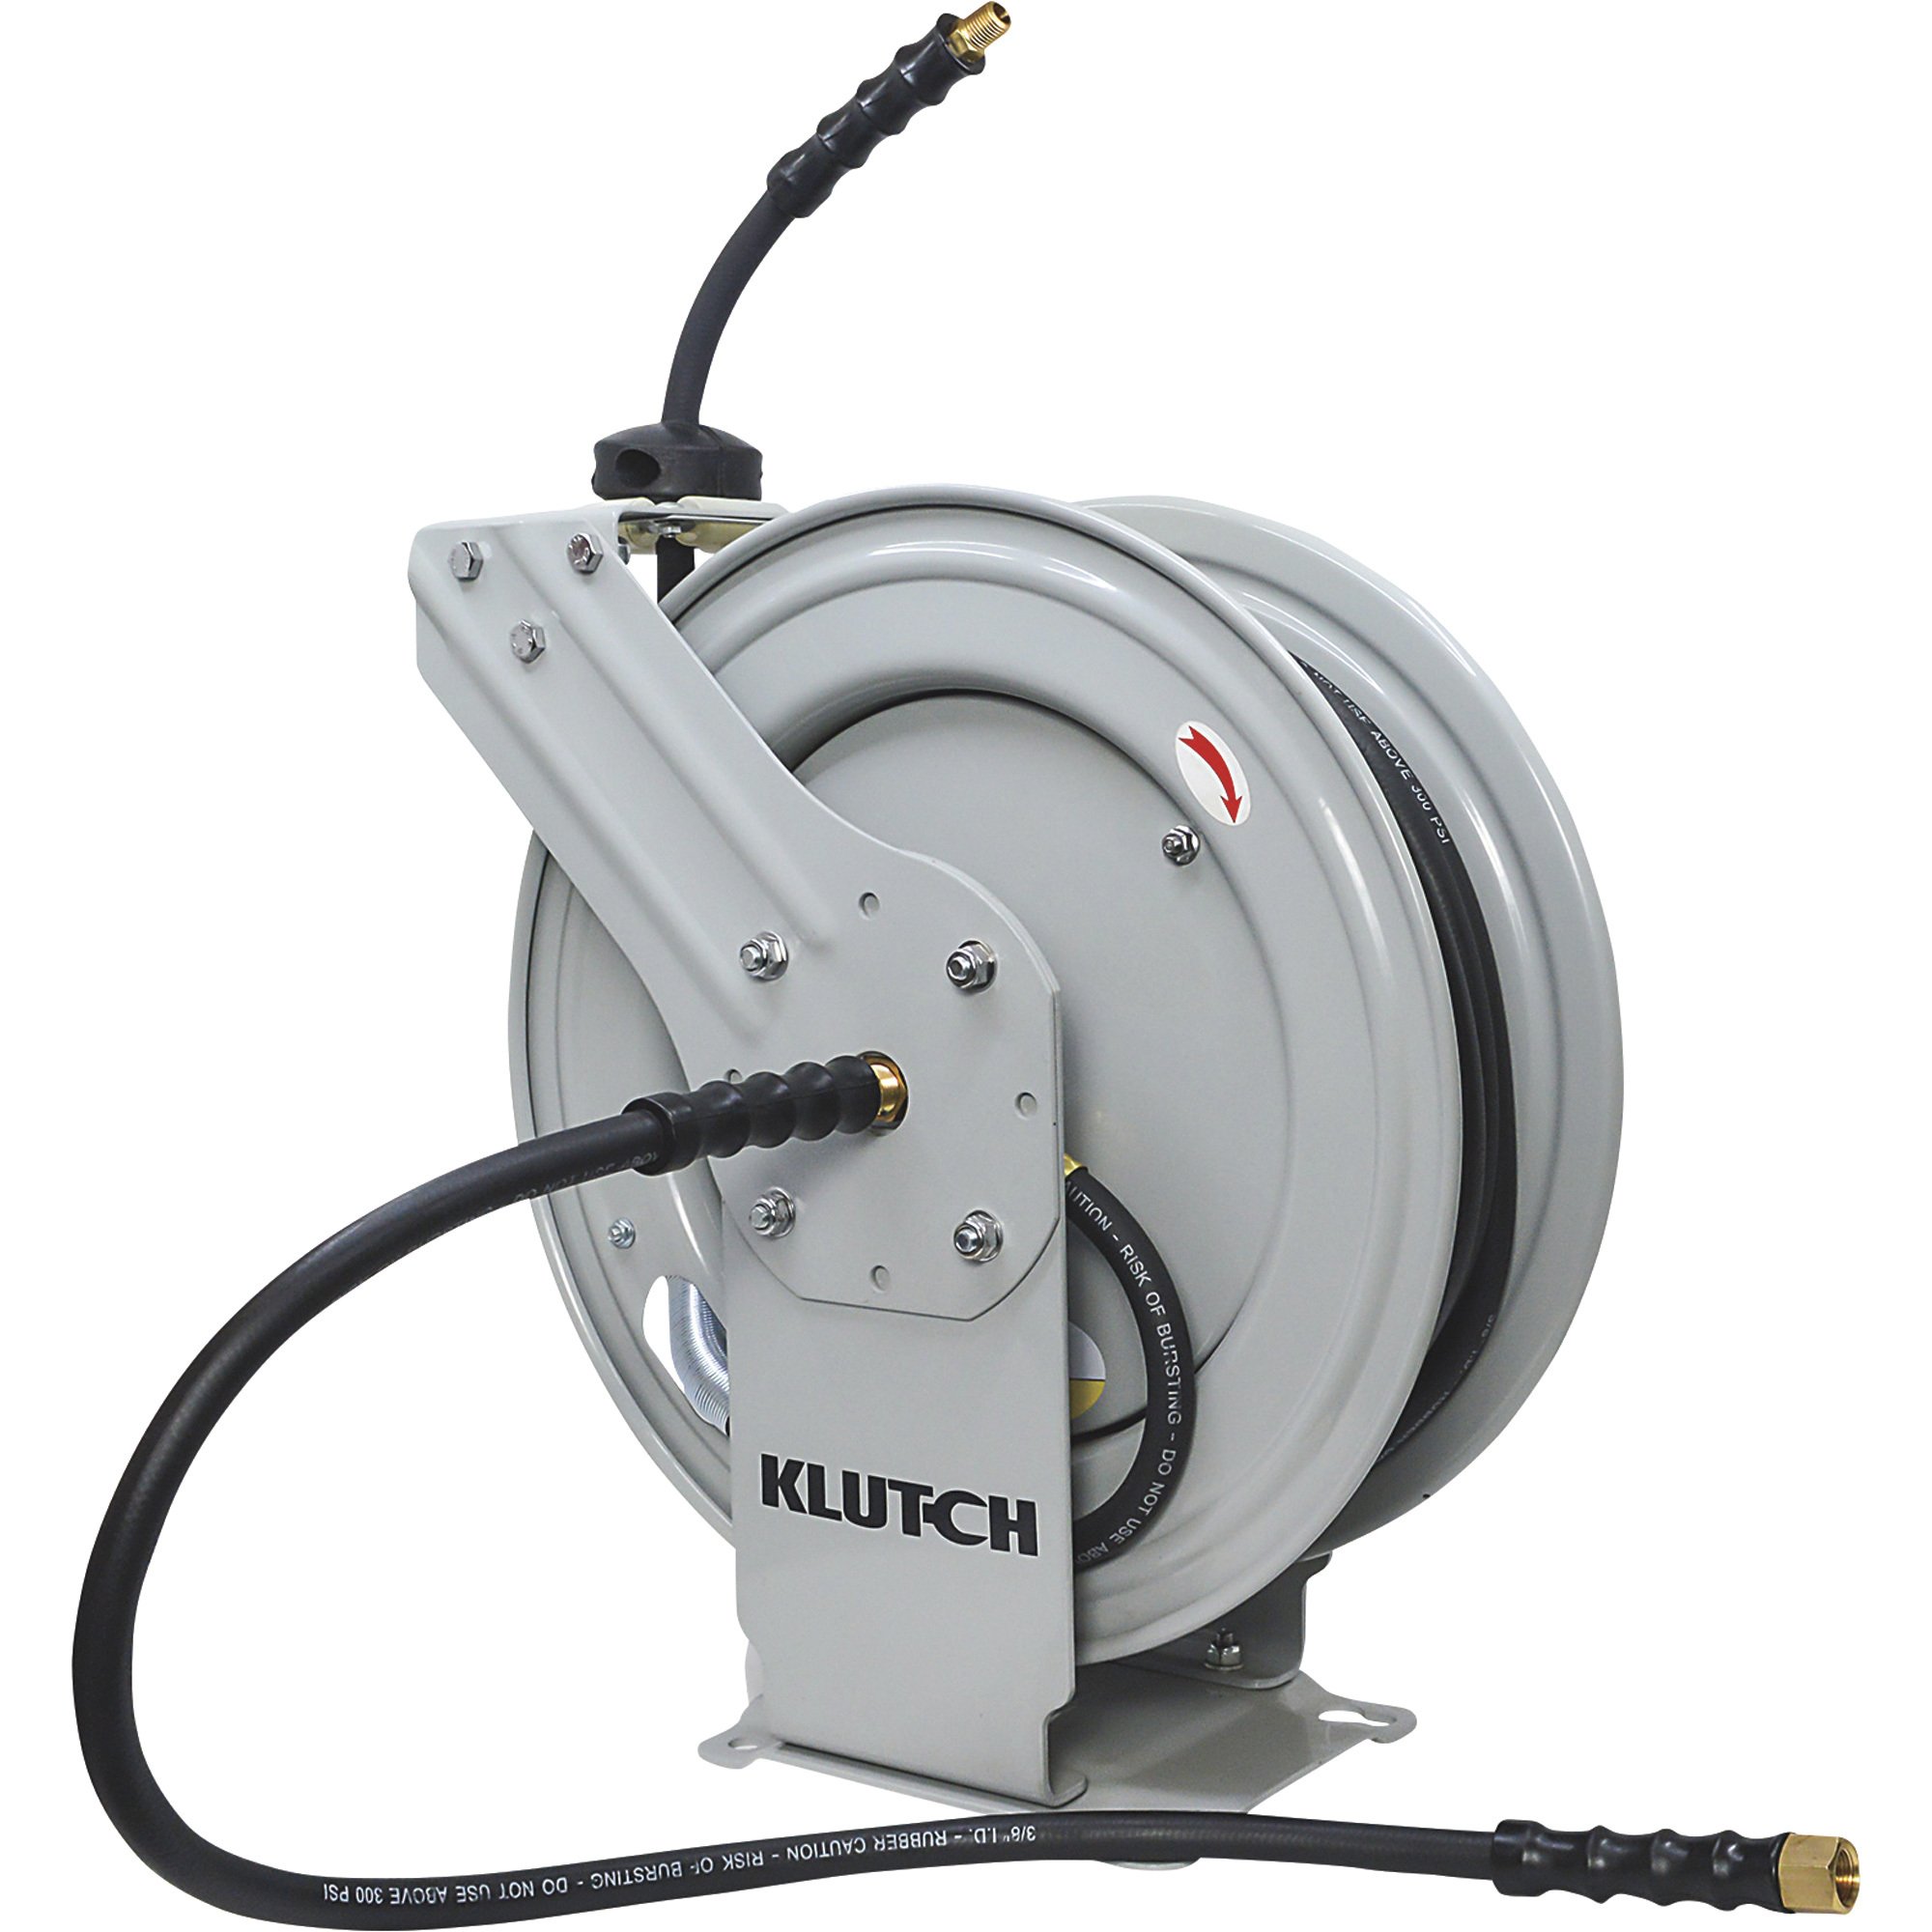 Klutch Auto-Rewind Air Hose Reel — With 3/8in. x 50ft. NBR Rubber Hose,  Dual Arm, 300 Max. PSI